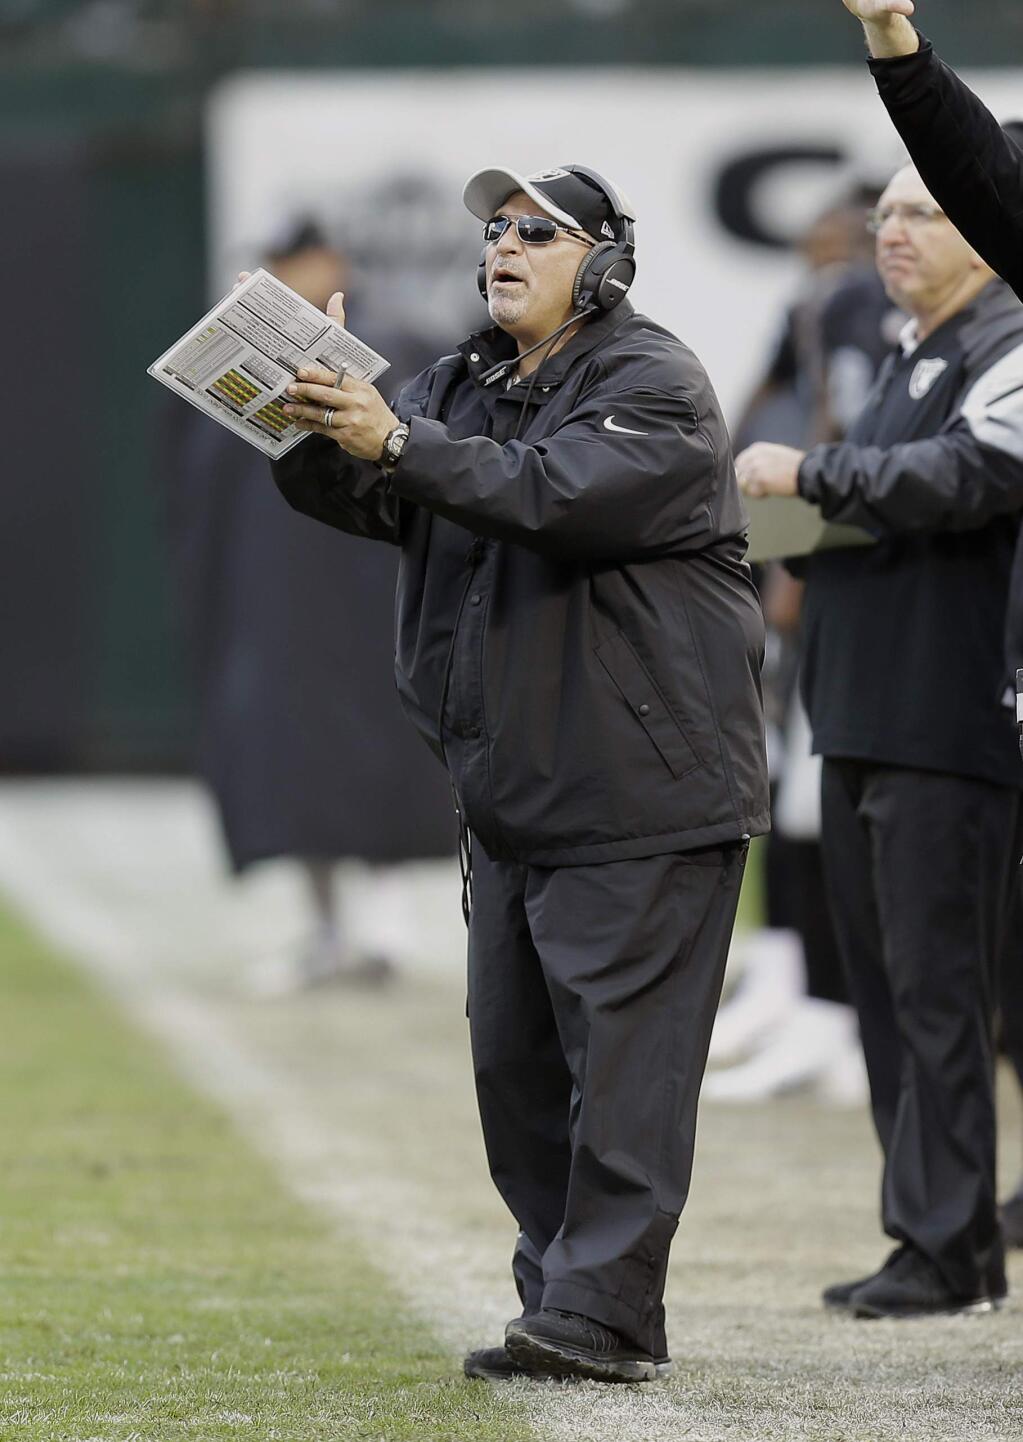 Oakland Raiders interim head coach Tony Sparano yells from the sideline during the second half of an NFL football game against the San Francisco 49ers in Oakland, Calif., Sunday, Dec. 7, 2014. The Raiders won 24-13. (AP Photo/Ben Margot)